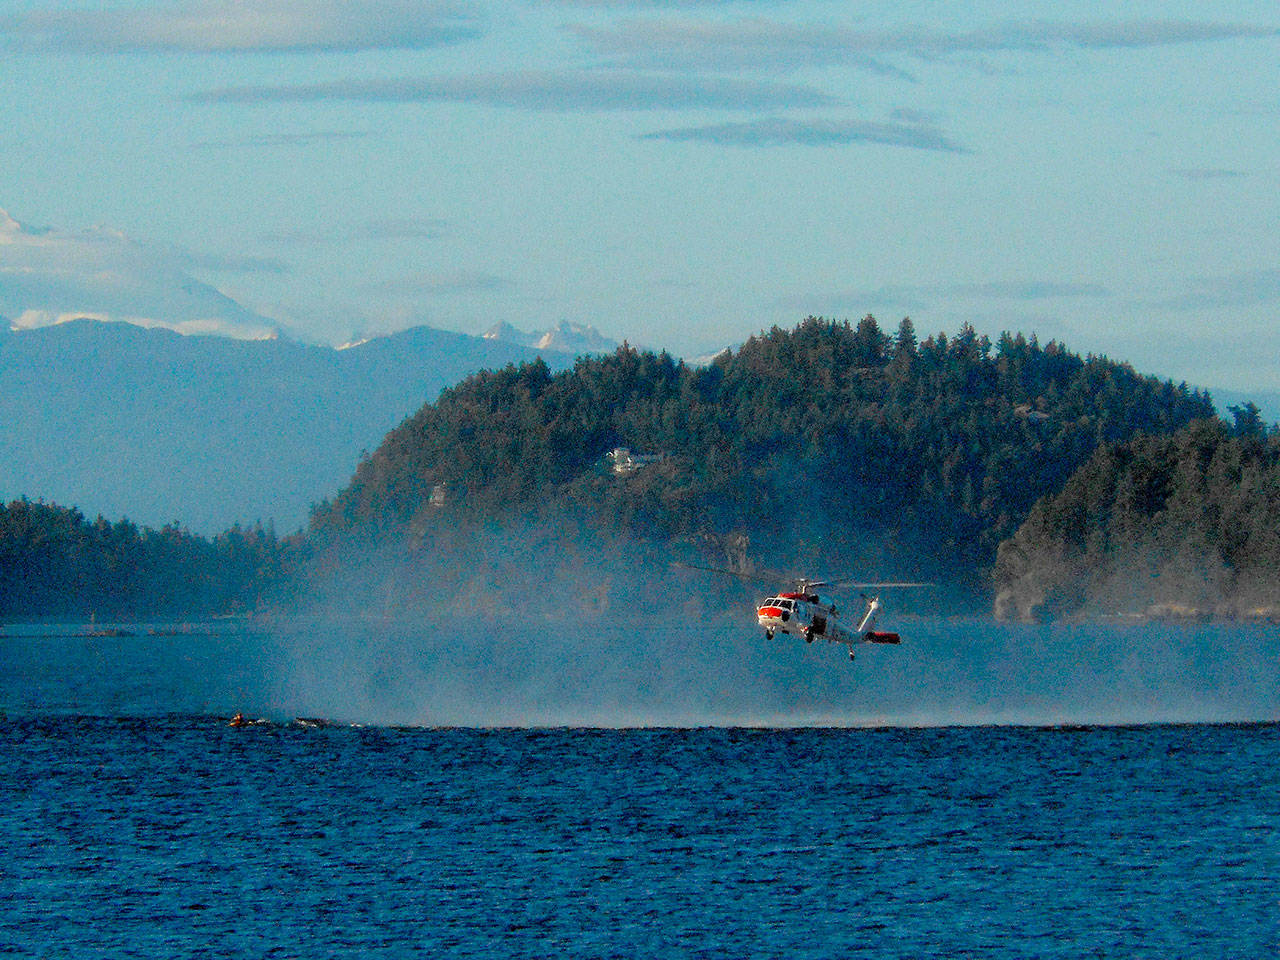 A SAR helicopter from Whidbey Island Naval Air Station rescues a distressed kayaker in Dugualla Bay Monday night. Photo by Richard Haines